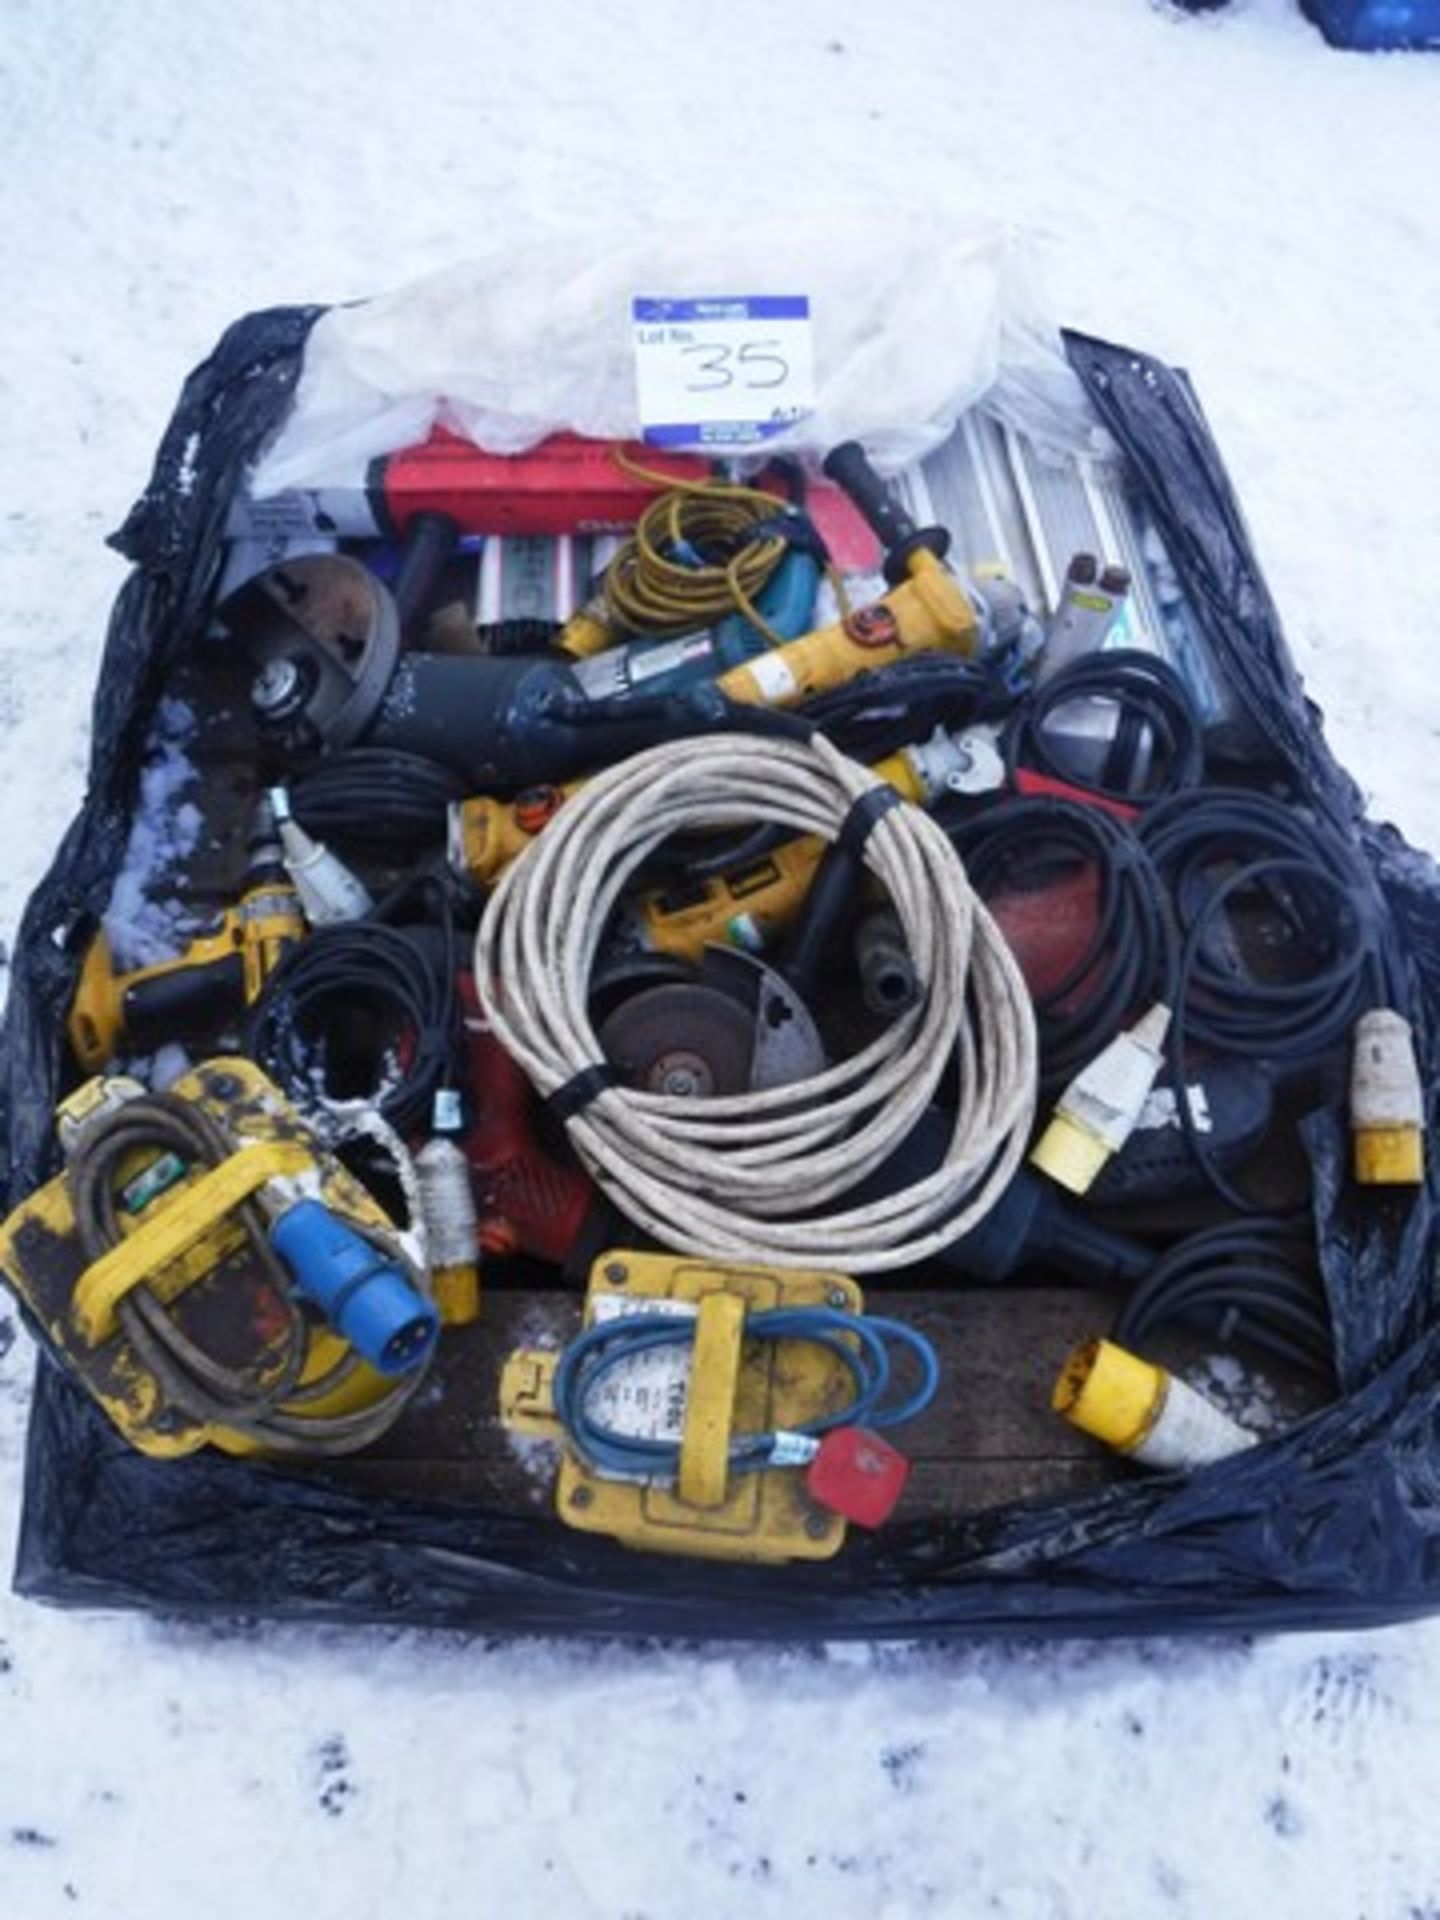 1 X PALLET OF POWER TOOLS, WELDING RODS & TRANSFORMERS - Image 2 of 2